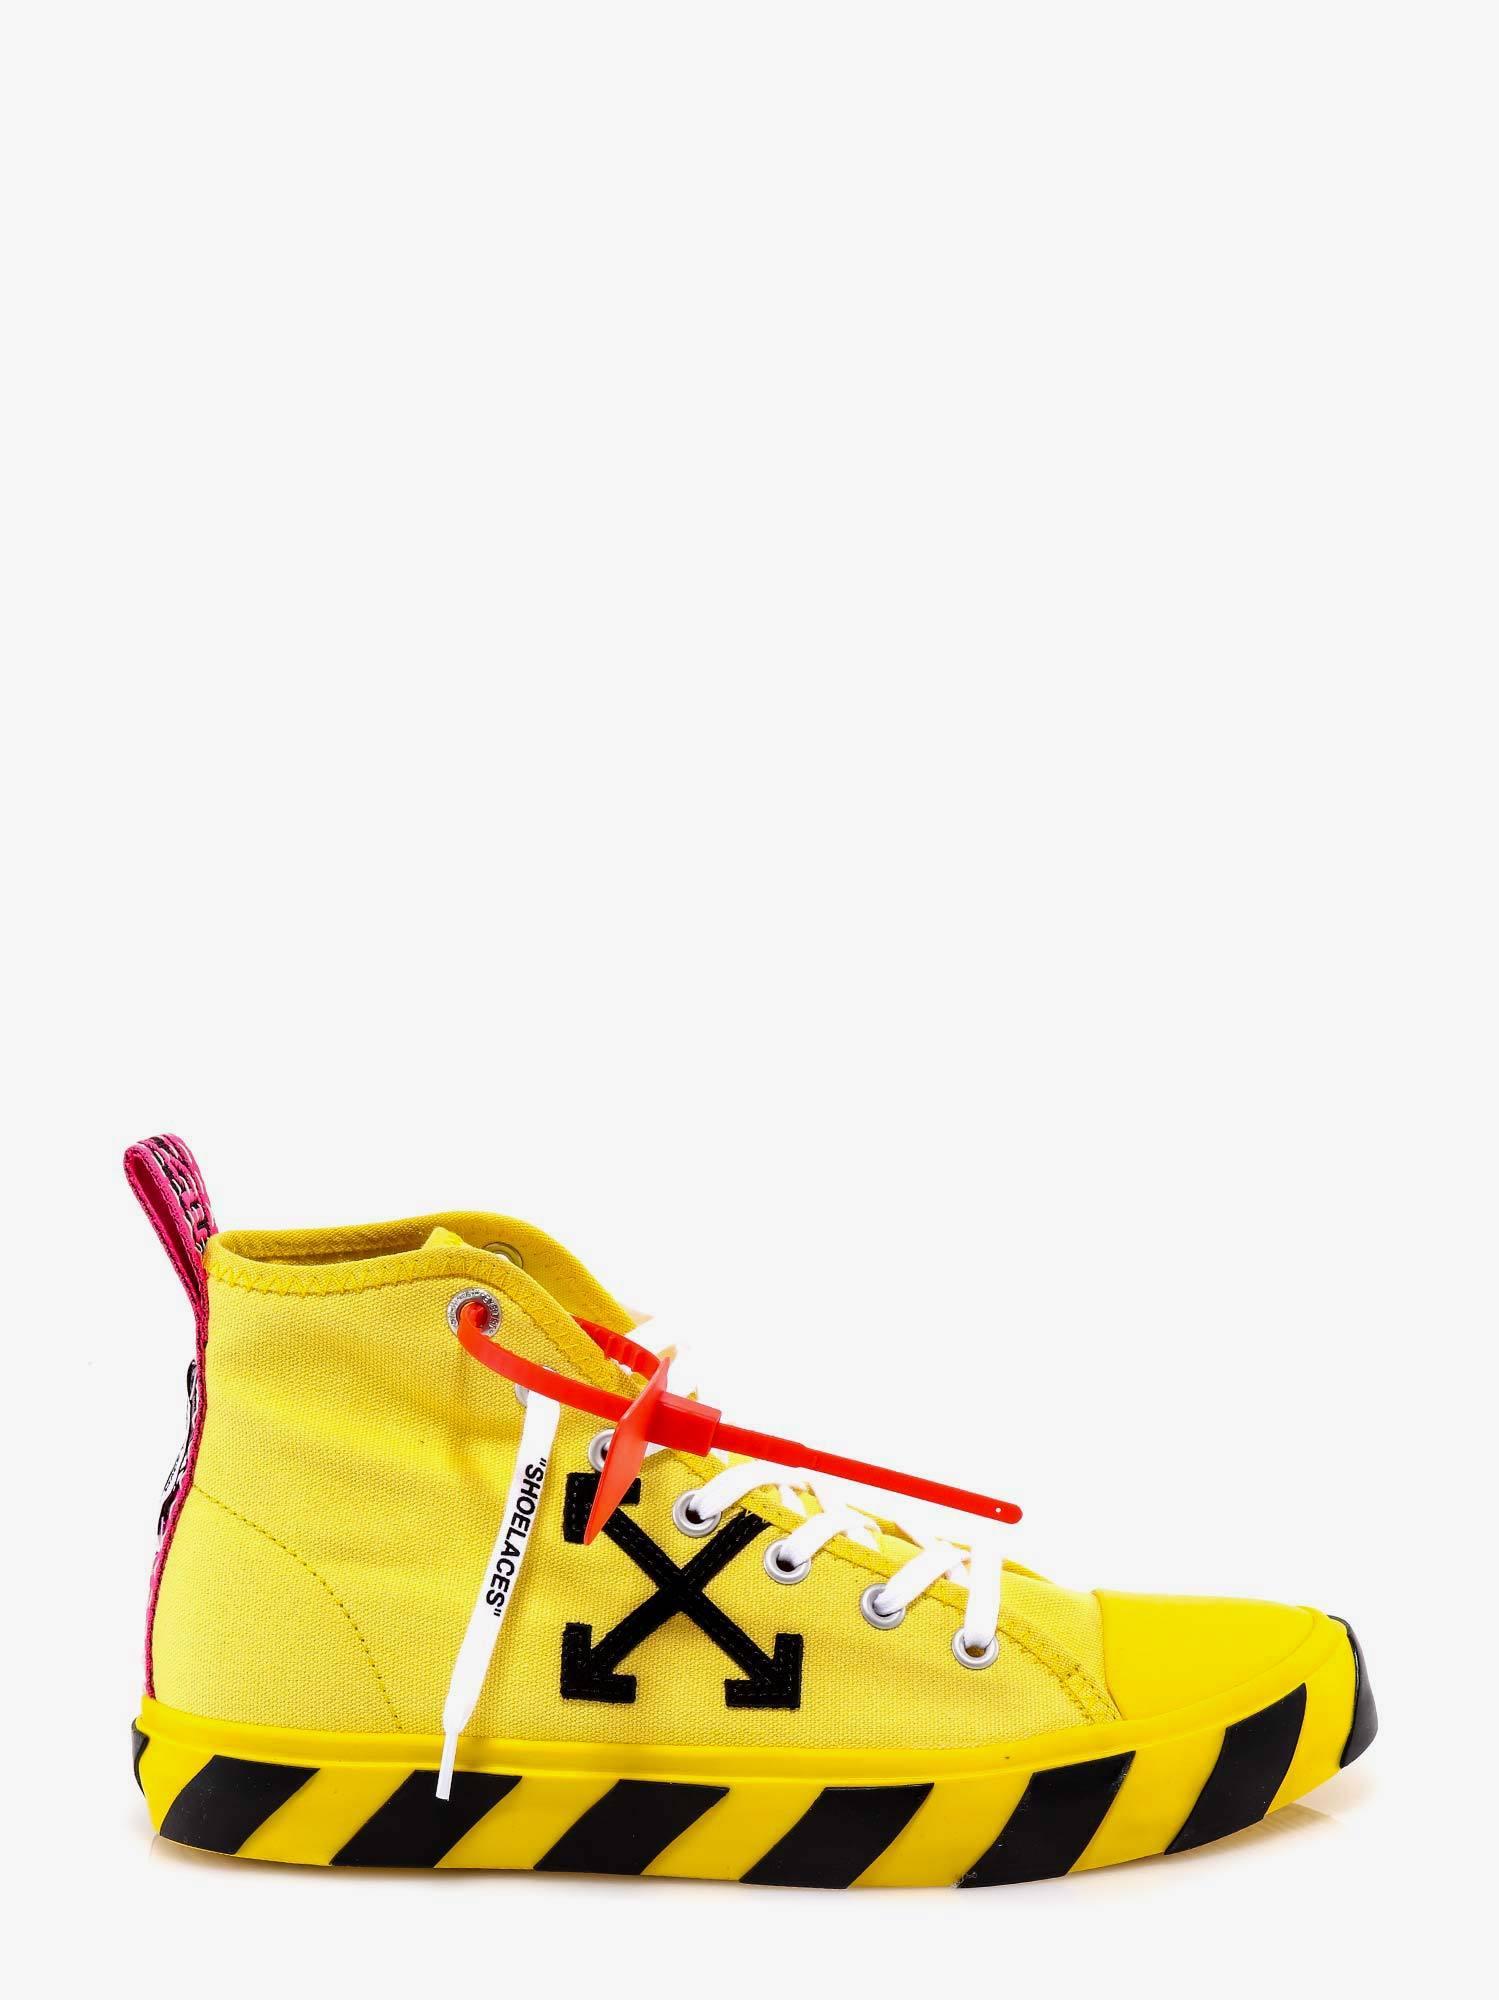 Off-White c/o Virgil Abloh Mid Top Sneakers in Yellow for Men | Lyst